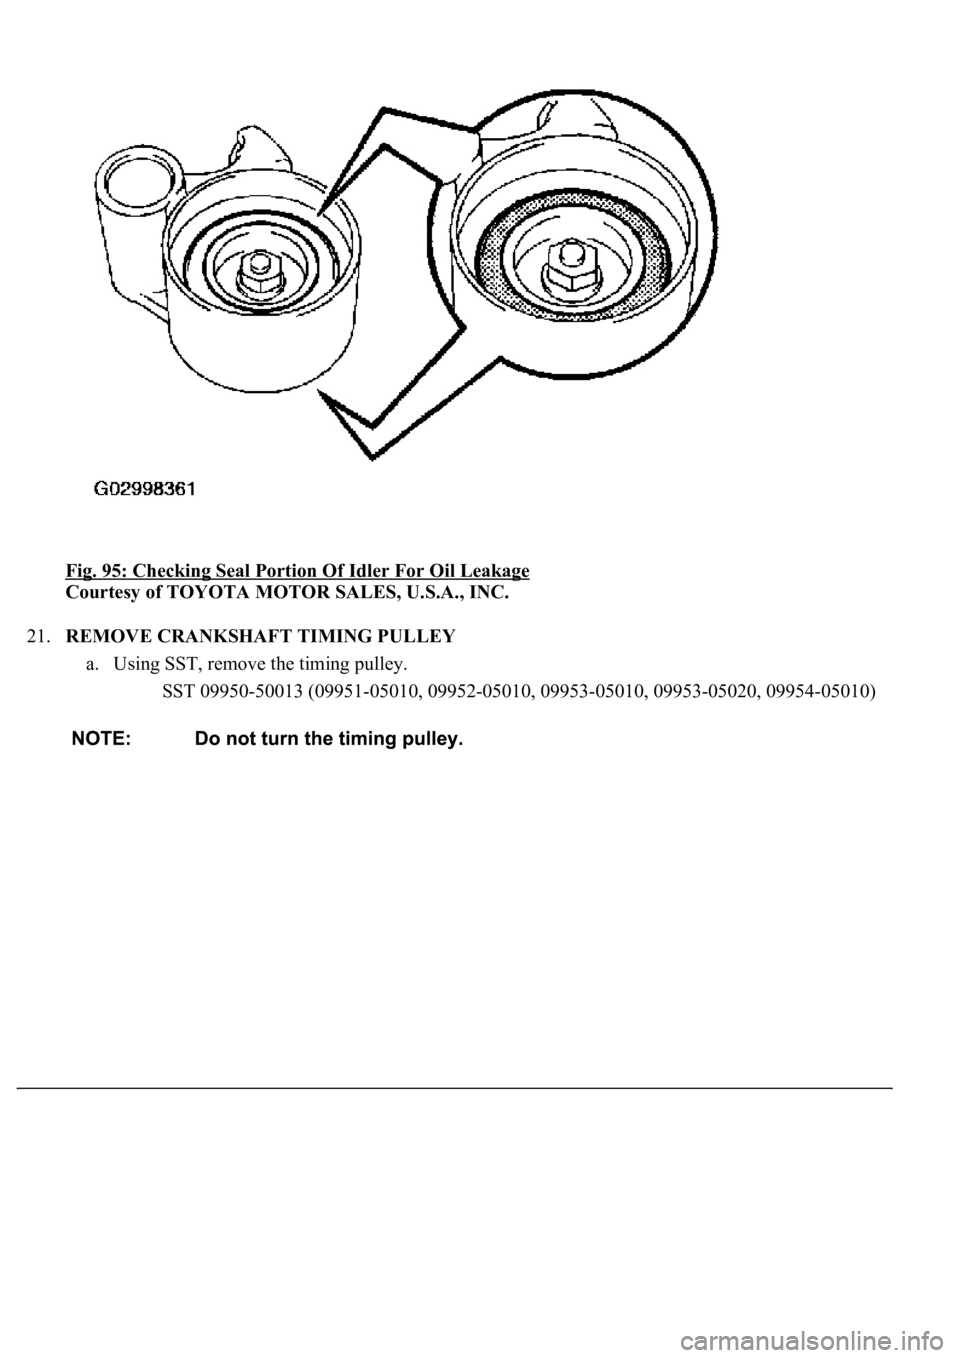 LEXUS LS430 2003  Factory Repair Manual Fig. 95: Checking Seal Portion Of Idler For Oil Leakage 
Courtesy of TOYOTA MOTOR SALES, U.S.A., INC. 
21.REMOVE CRANKSHAFT TIMING PULLEY 
a. Using SST, remove the timing pulley. 
SST 09950-50013 (099